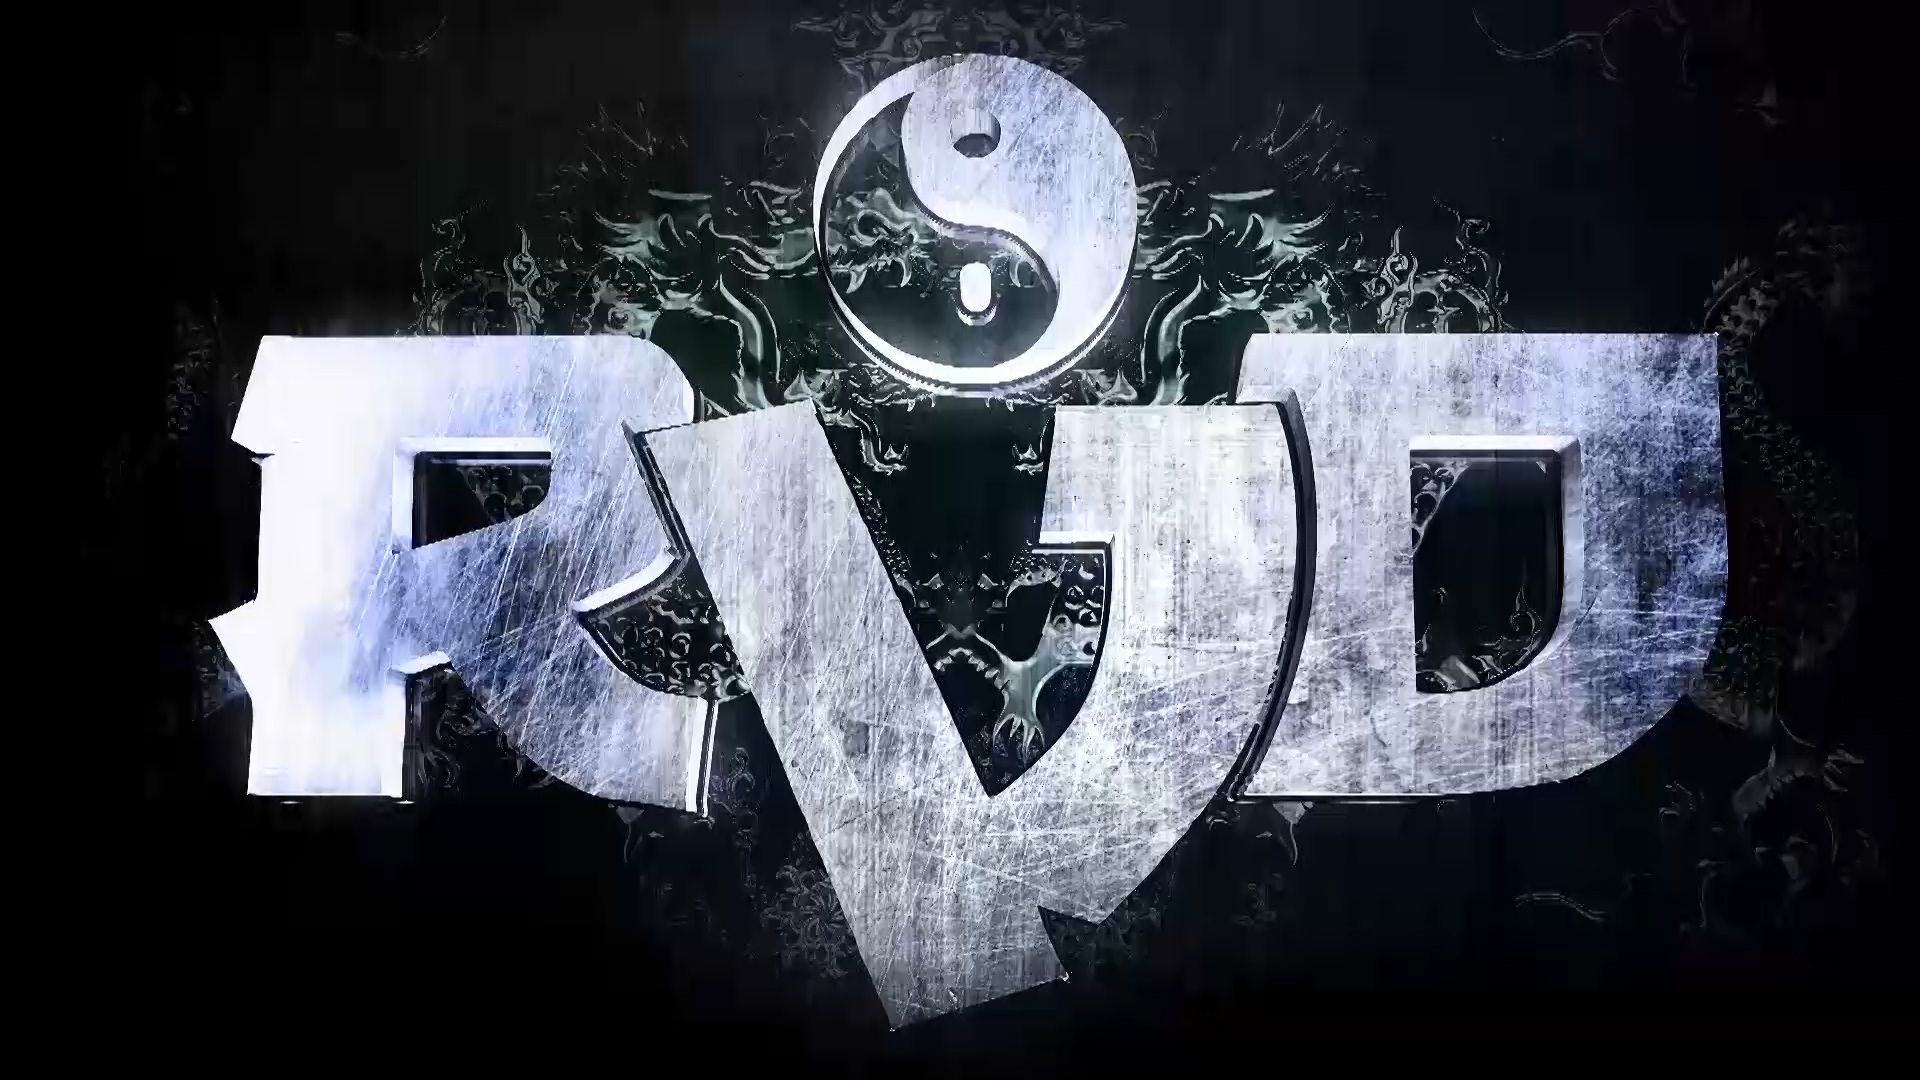 Rob Van Dam New Theme Song and Entrance Video